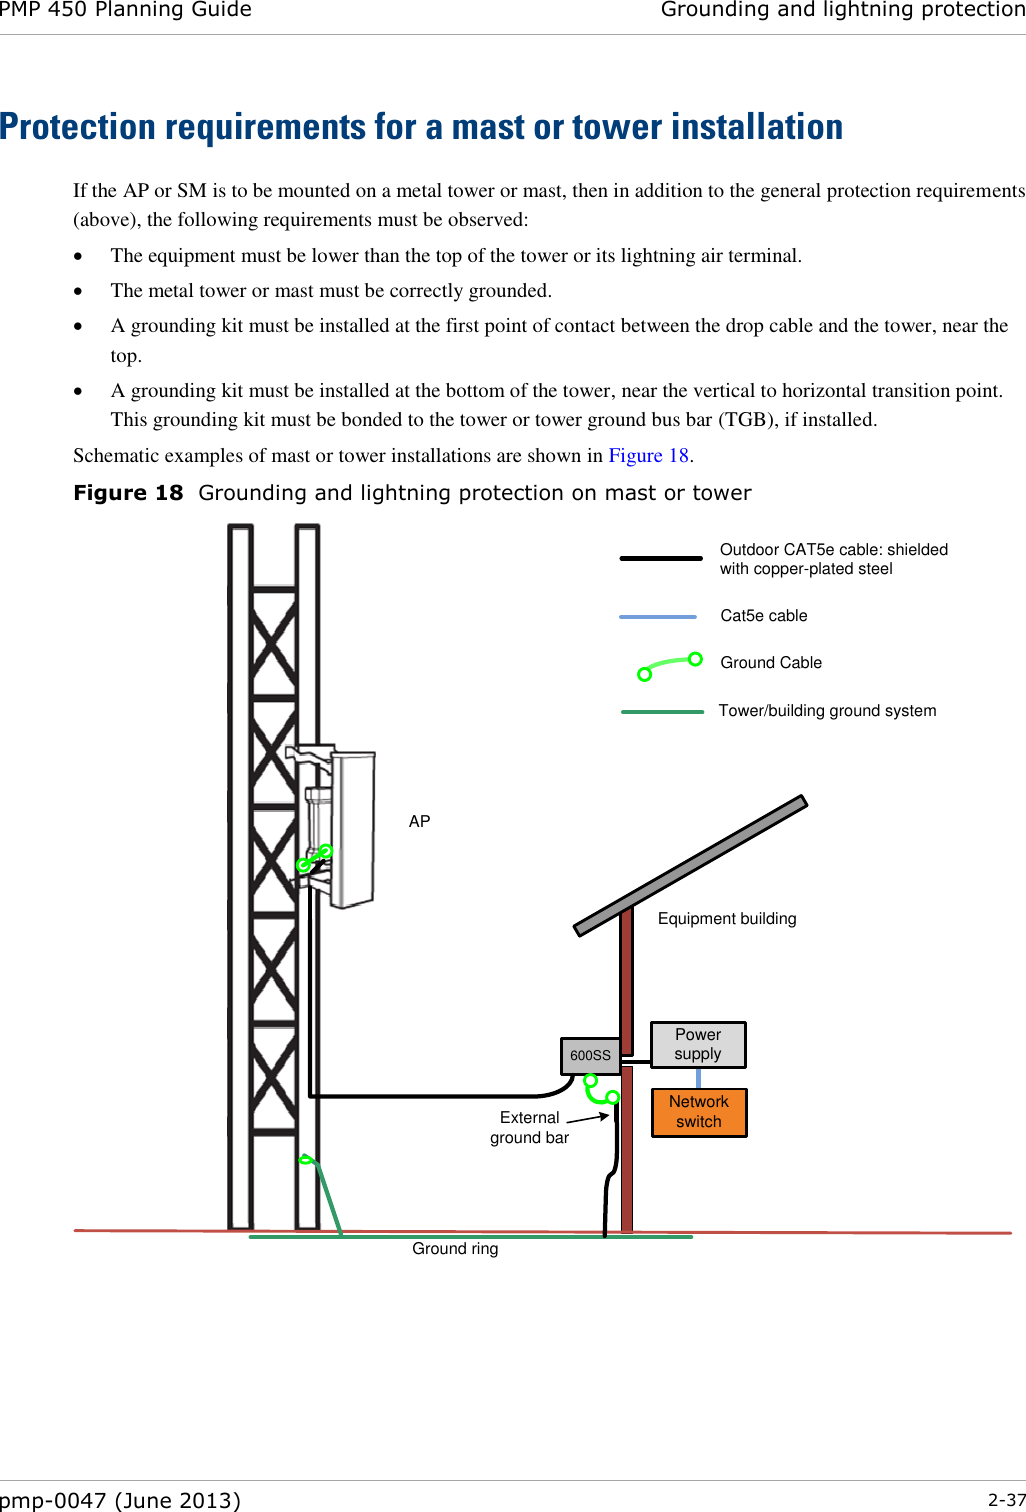 PMP 450 Planning Guide Grounding and lightning protection  pmp-0047 (June 2013)  2-37  Protection requirements for a mast or tower installation If the AP or SM is to be mounted on a metal tower or mast, then in addition to the general protection requirements (above), the following requirements must be observed:  The equipment must be lower than the top of the tower or its lightning air terminal.  The metal tower or mast must be correctly grounded.  A grounding kit must be installed at the first point of contact between the drop cable and the tower, near the top.  A grounding kit must be installed at the bottom of the tower, near the vertical to horizontal transition point. This grounding kit must be bonded to the tower or tower ground bus bar (TGB), if installed. Schematic examples of mast or tower installations are shown in Figure 18. Figure 18  Grounding and lightning protection on mast or tower 600SSExternal ground barGround ringOutdoor CAT5e cable: shielded with copper-plated steelPower supplyEquipment buildingNetwork switchAPGround CableTower/building ground systemCat5e cable 